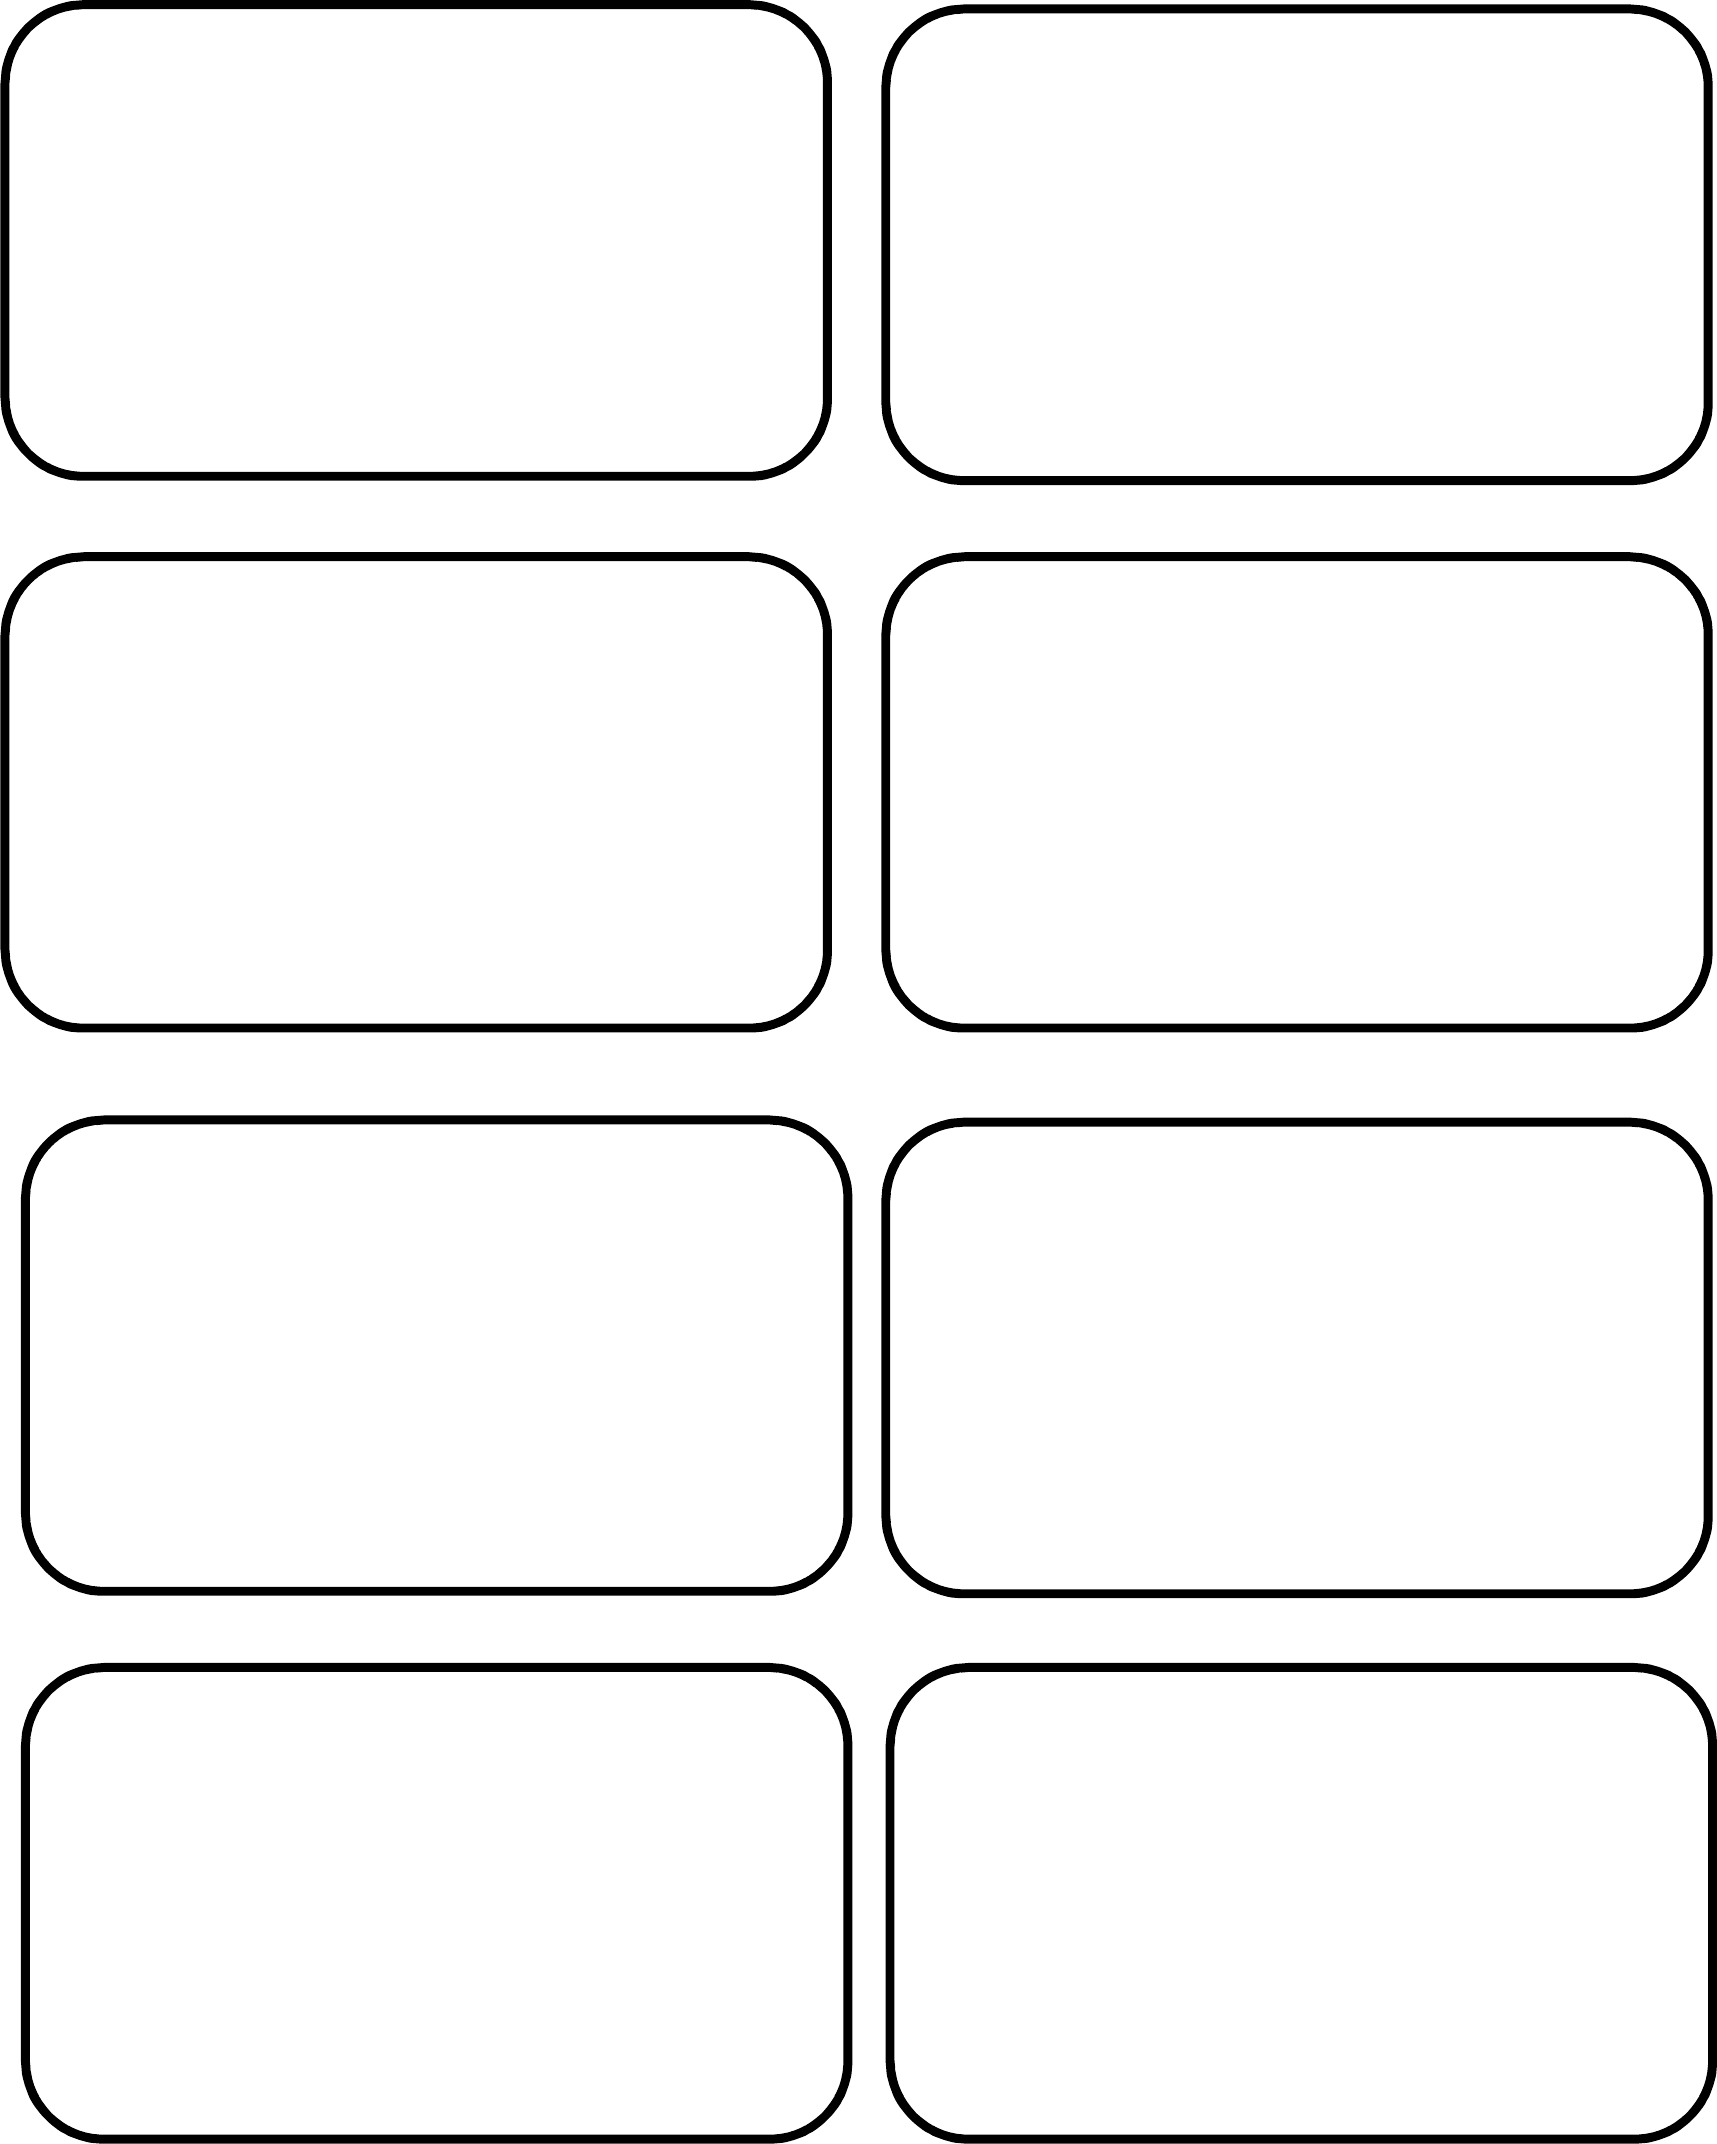 Printable Luggage Tag Templates | Download Them Or Print With Regard To Blank Luggage Tag Template